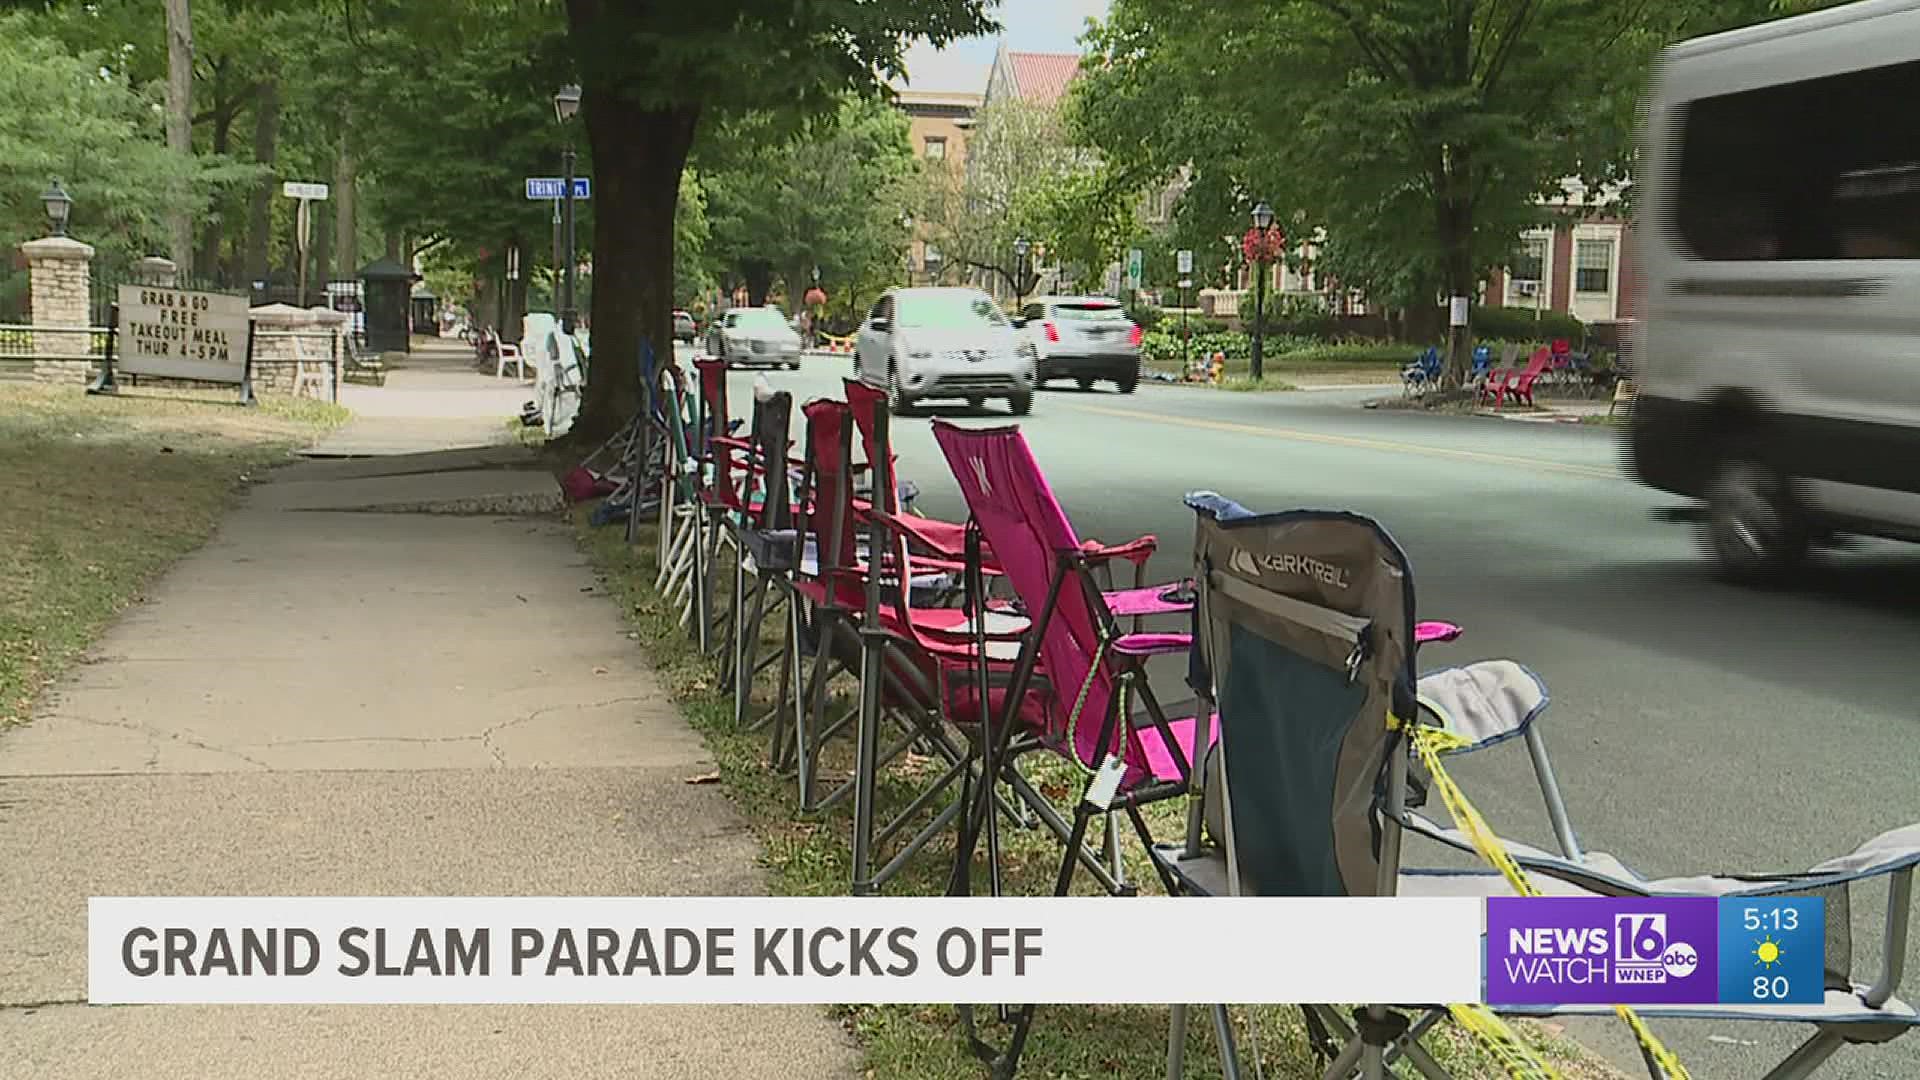 This week marks the start of the 75th Little League World Series with the 16th Grand Slam Parade set to kick off Monday night in downtown Williamsport.